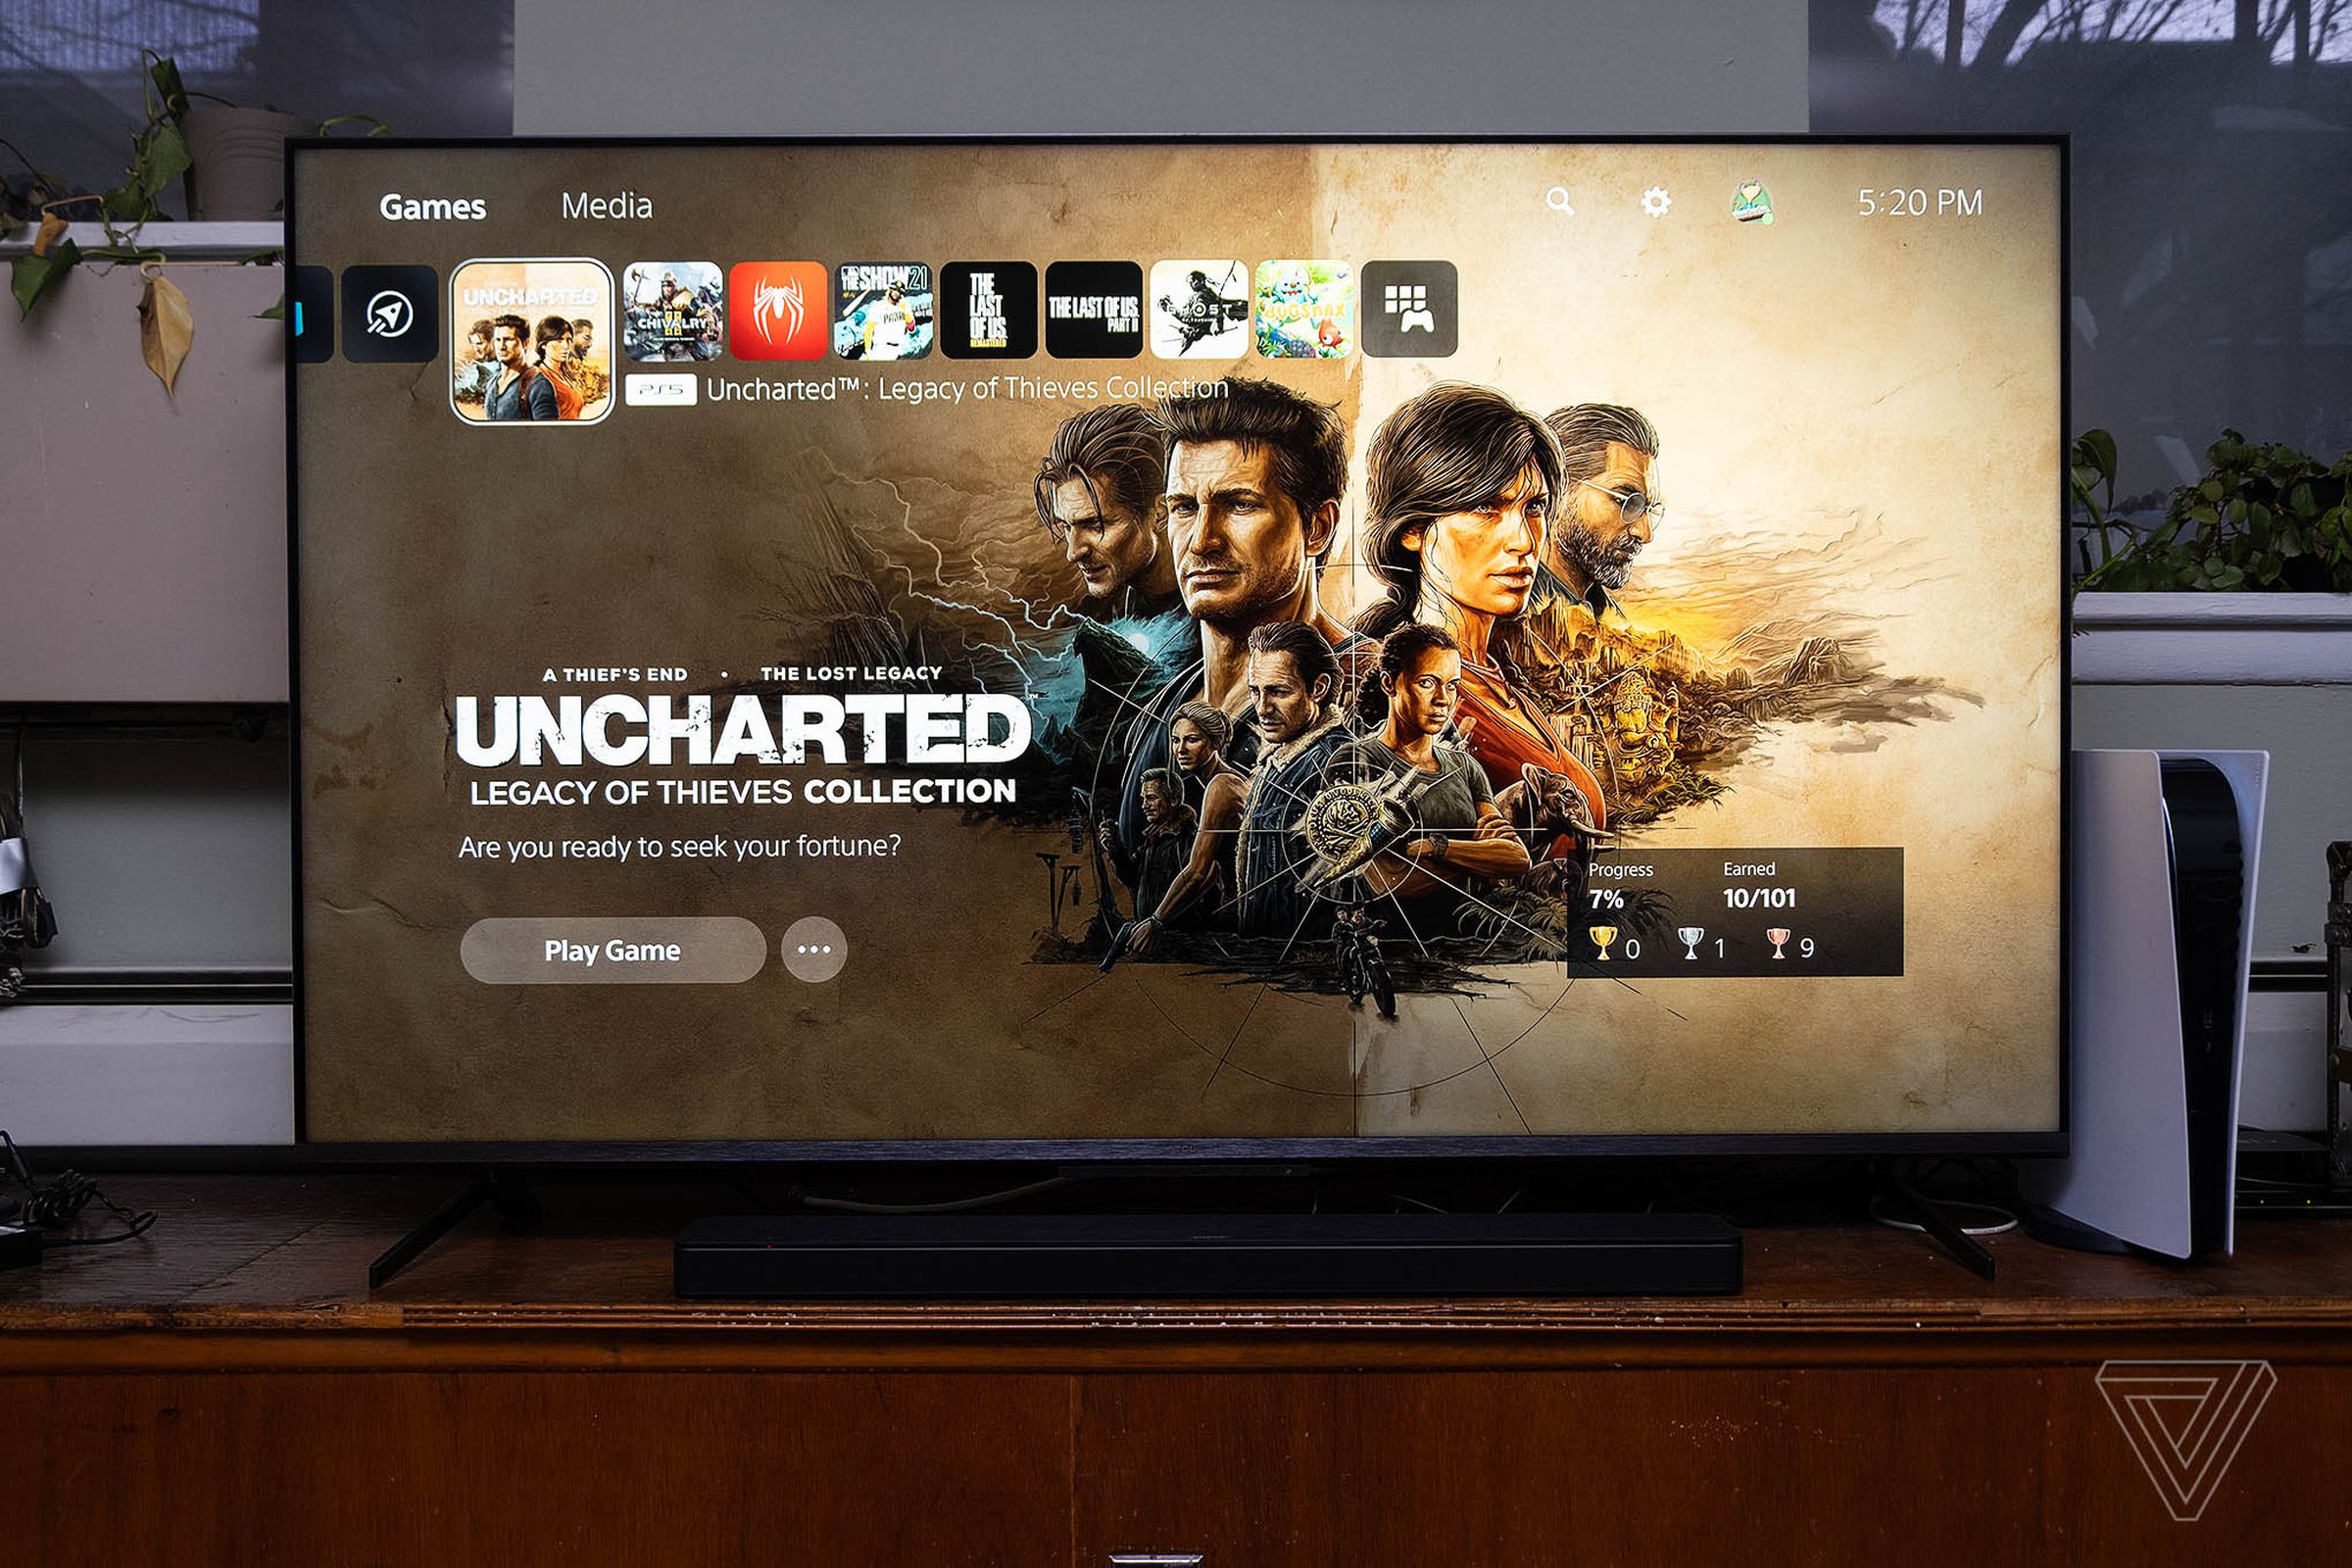 TCL’s 6-series TV displaying the PS5 home menu screen, with Uncharted Legacy of Thieves Collection showing.